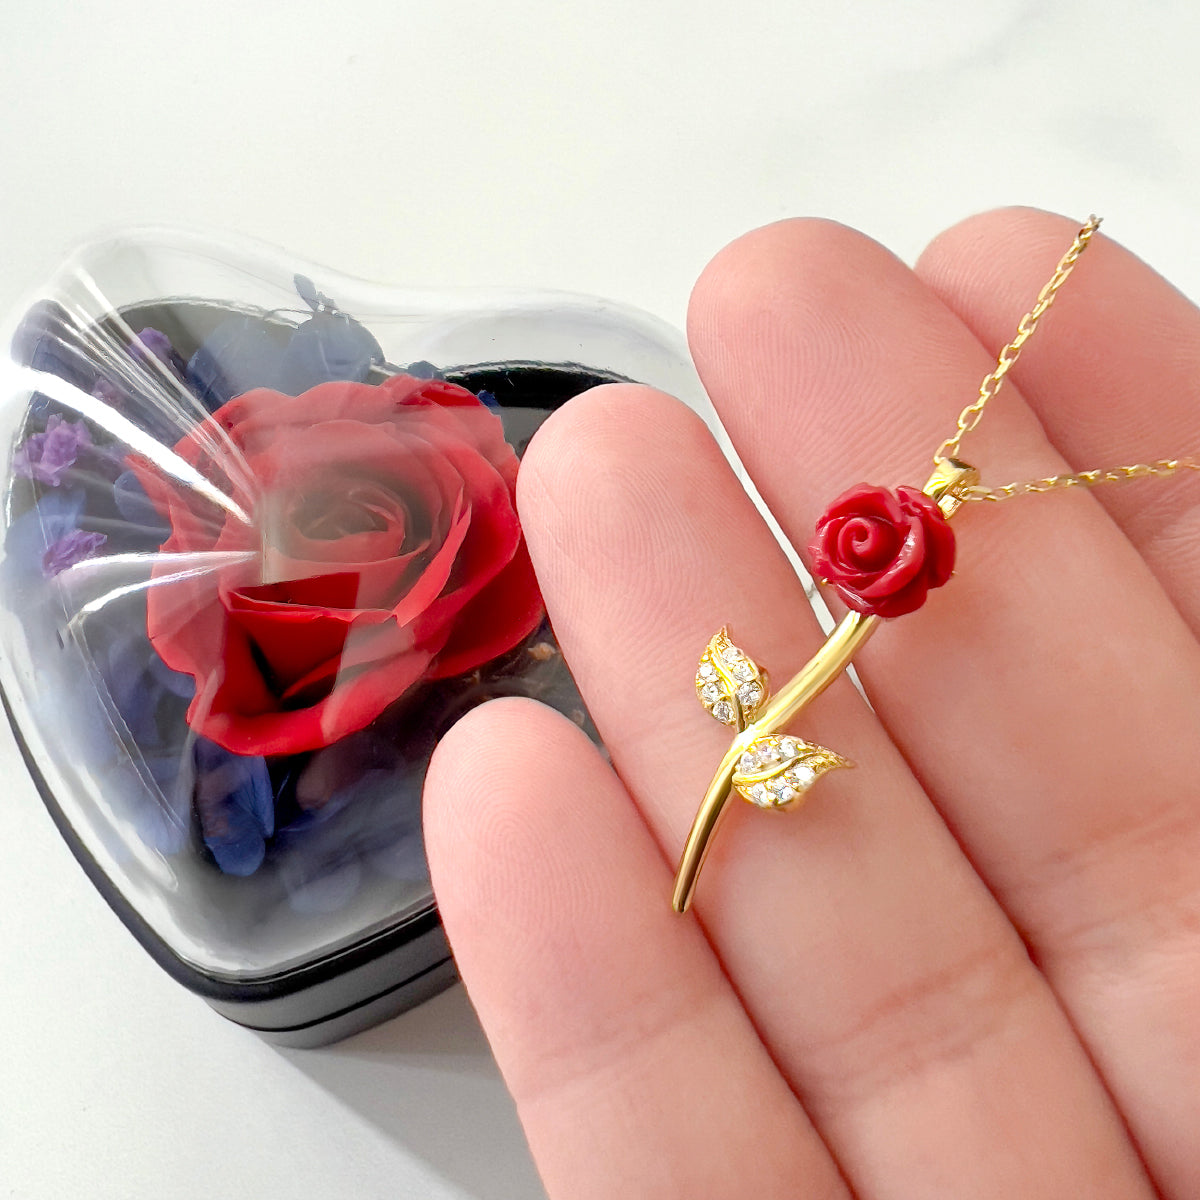 2 Sets of Everlasting Love - Red Rose Necklace with Rose Box Gift Set